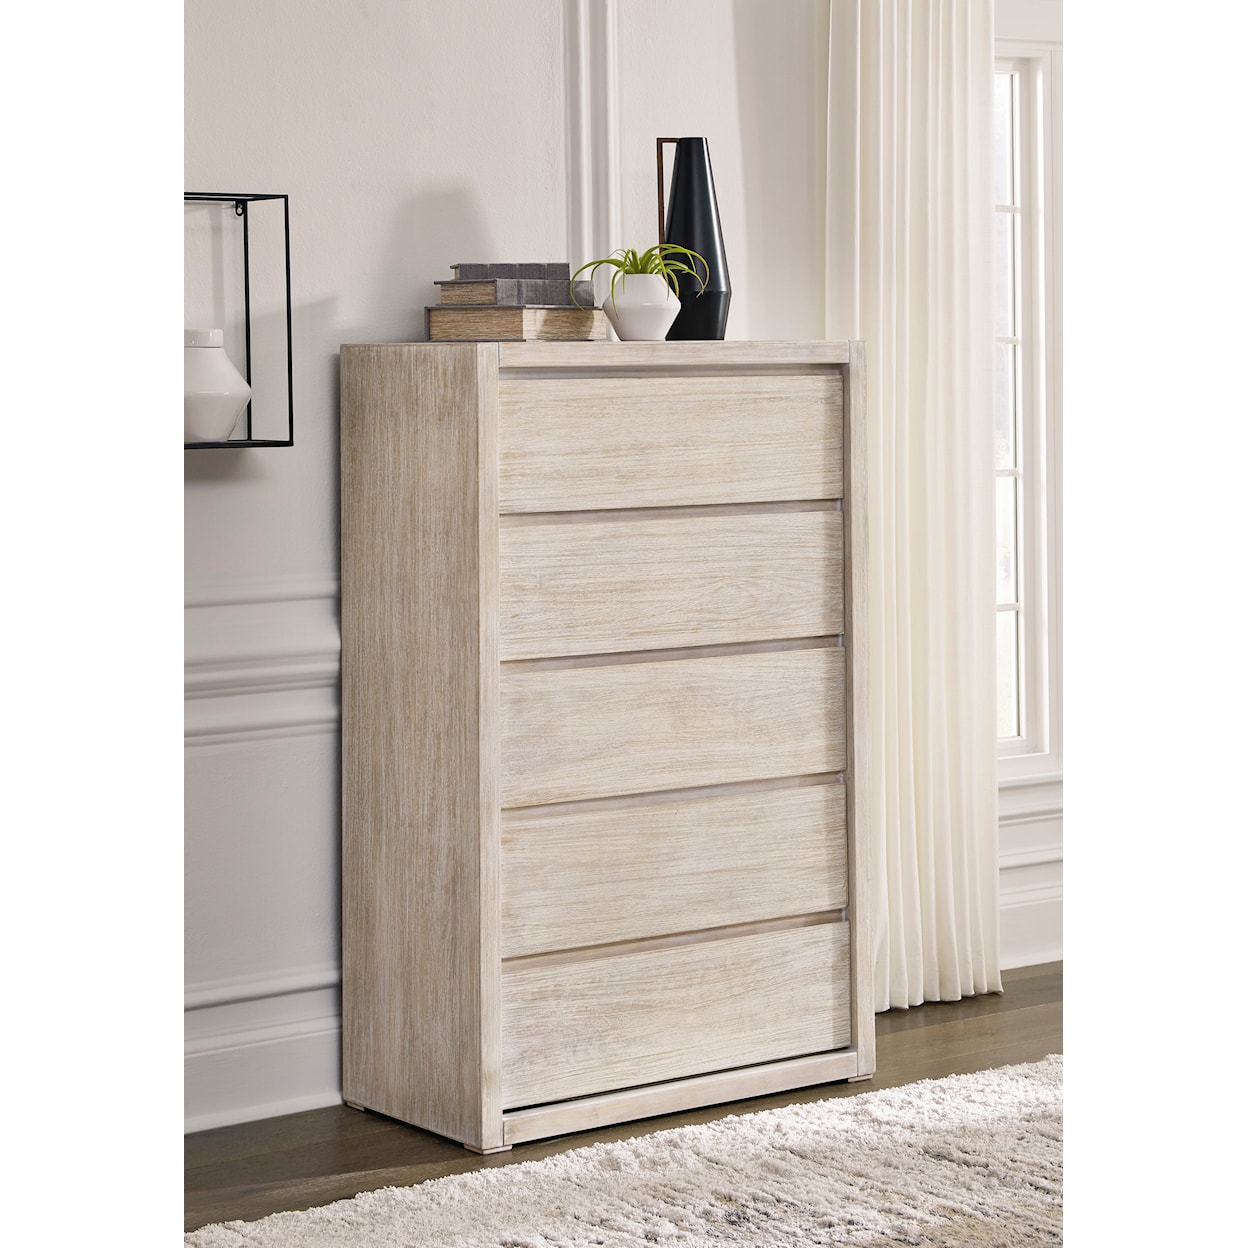 Ashley Furniture Michelia Chest of Drawers